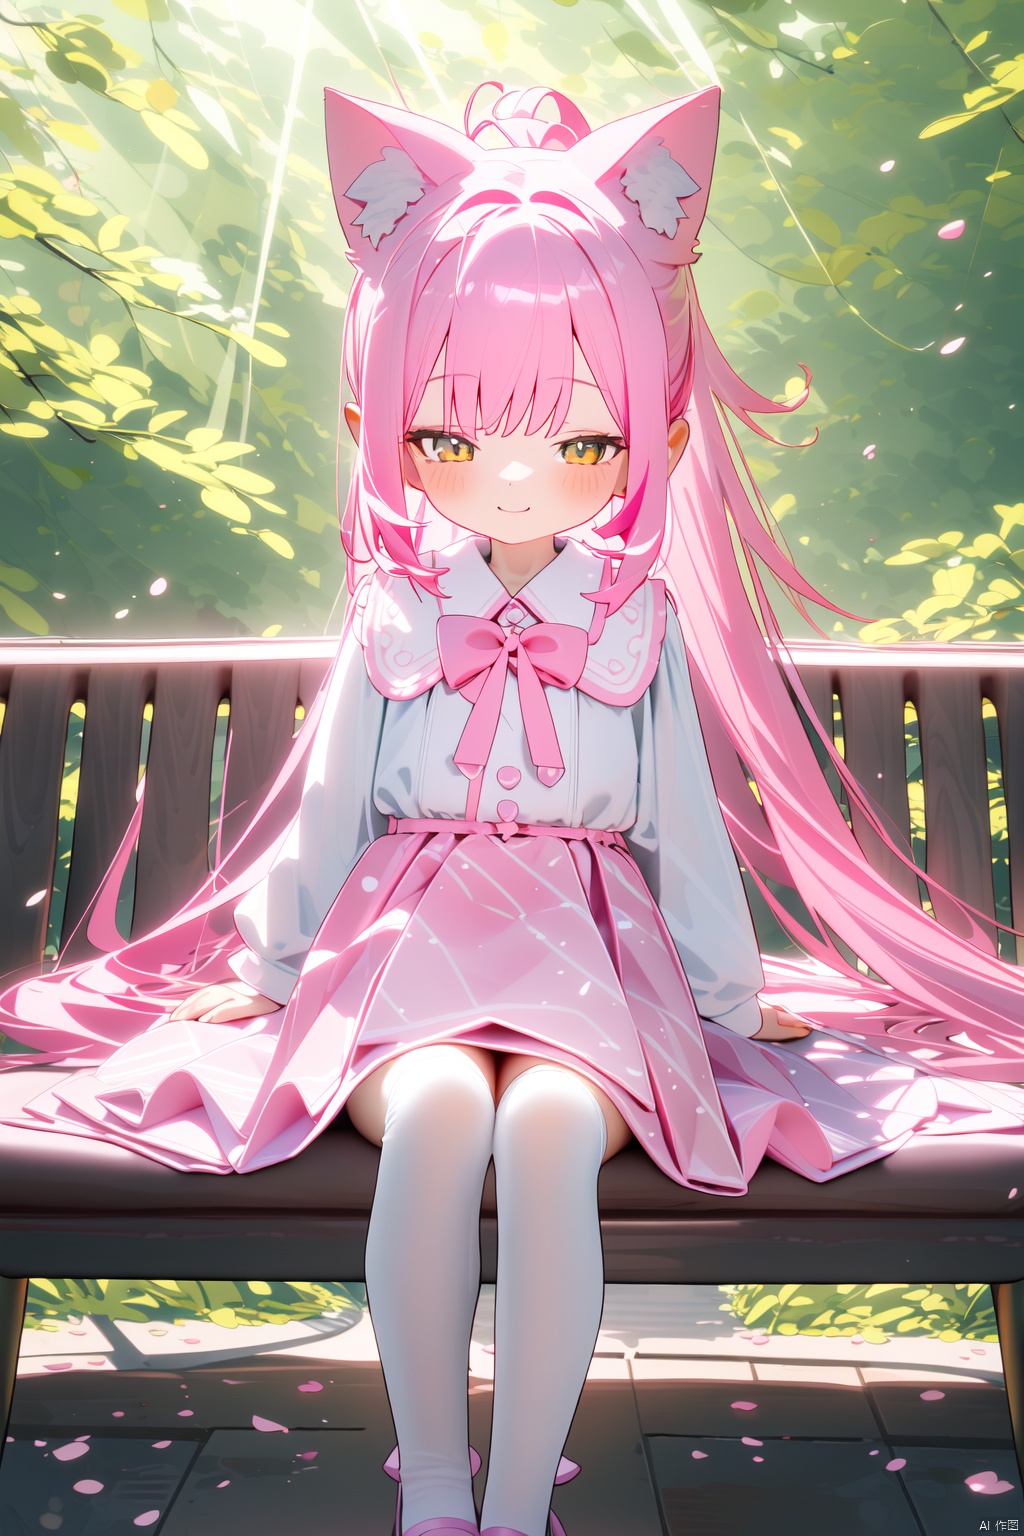 1girl, loli, solo, pink hair, long hair in ponytail, yellow eyes, cat ears, sitting, looking at viewer, full body, wearing white shirt with pink bow, pink skirt, pink and white striped thigh highs, pink cat tail swishing gently, pink haired cat girl, outdoor scene, sakura tree in bloom, pink petals falling, stone bench, rays of sunlight streaming through branches, rays lighting up hair and dress, detailed textures, lifelike fur on ears, soft expression, cute smile, Fine Hands, Beautiful Hands, Perfect Hands, Delicate Hands, Fine Line Drawing